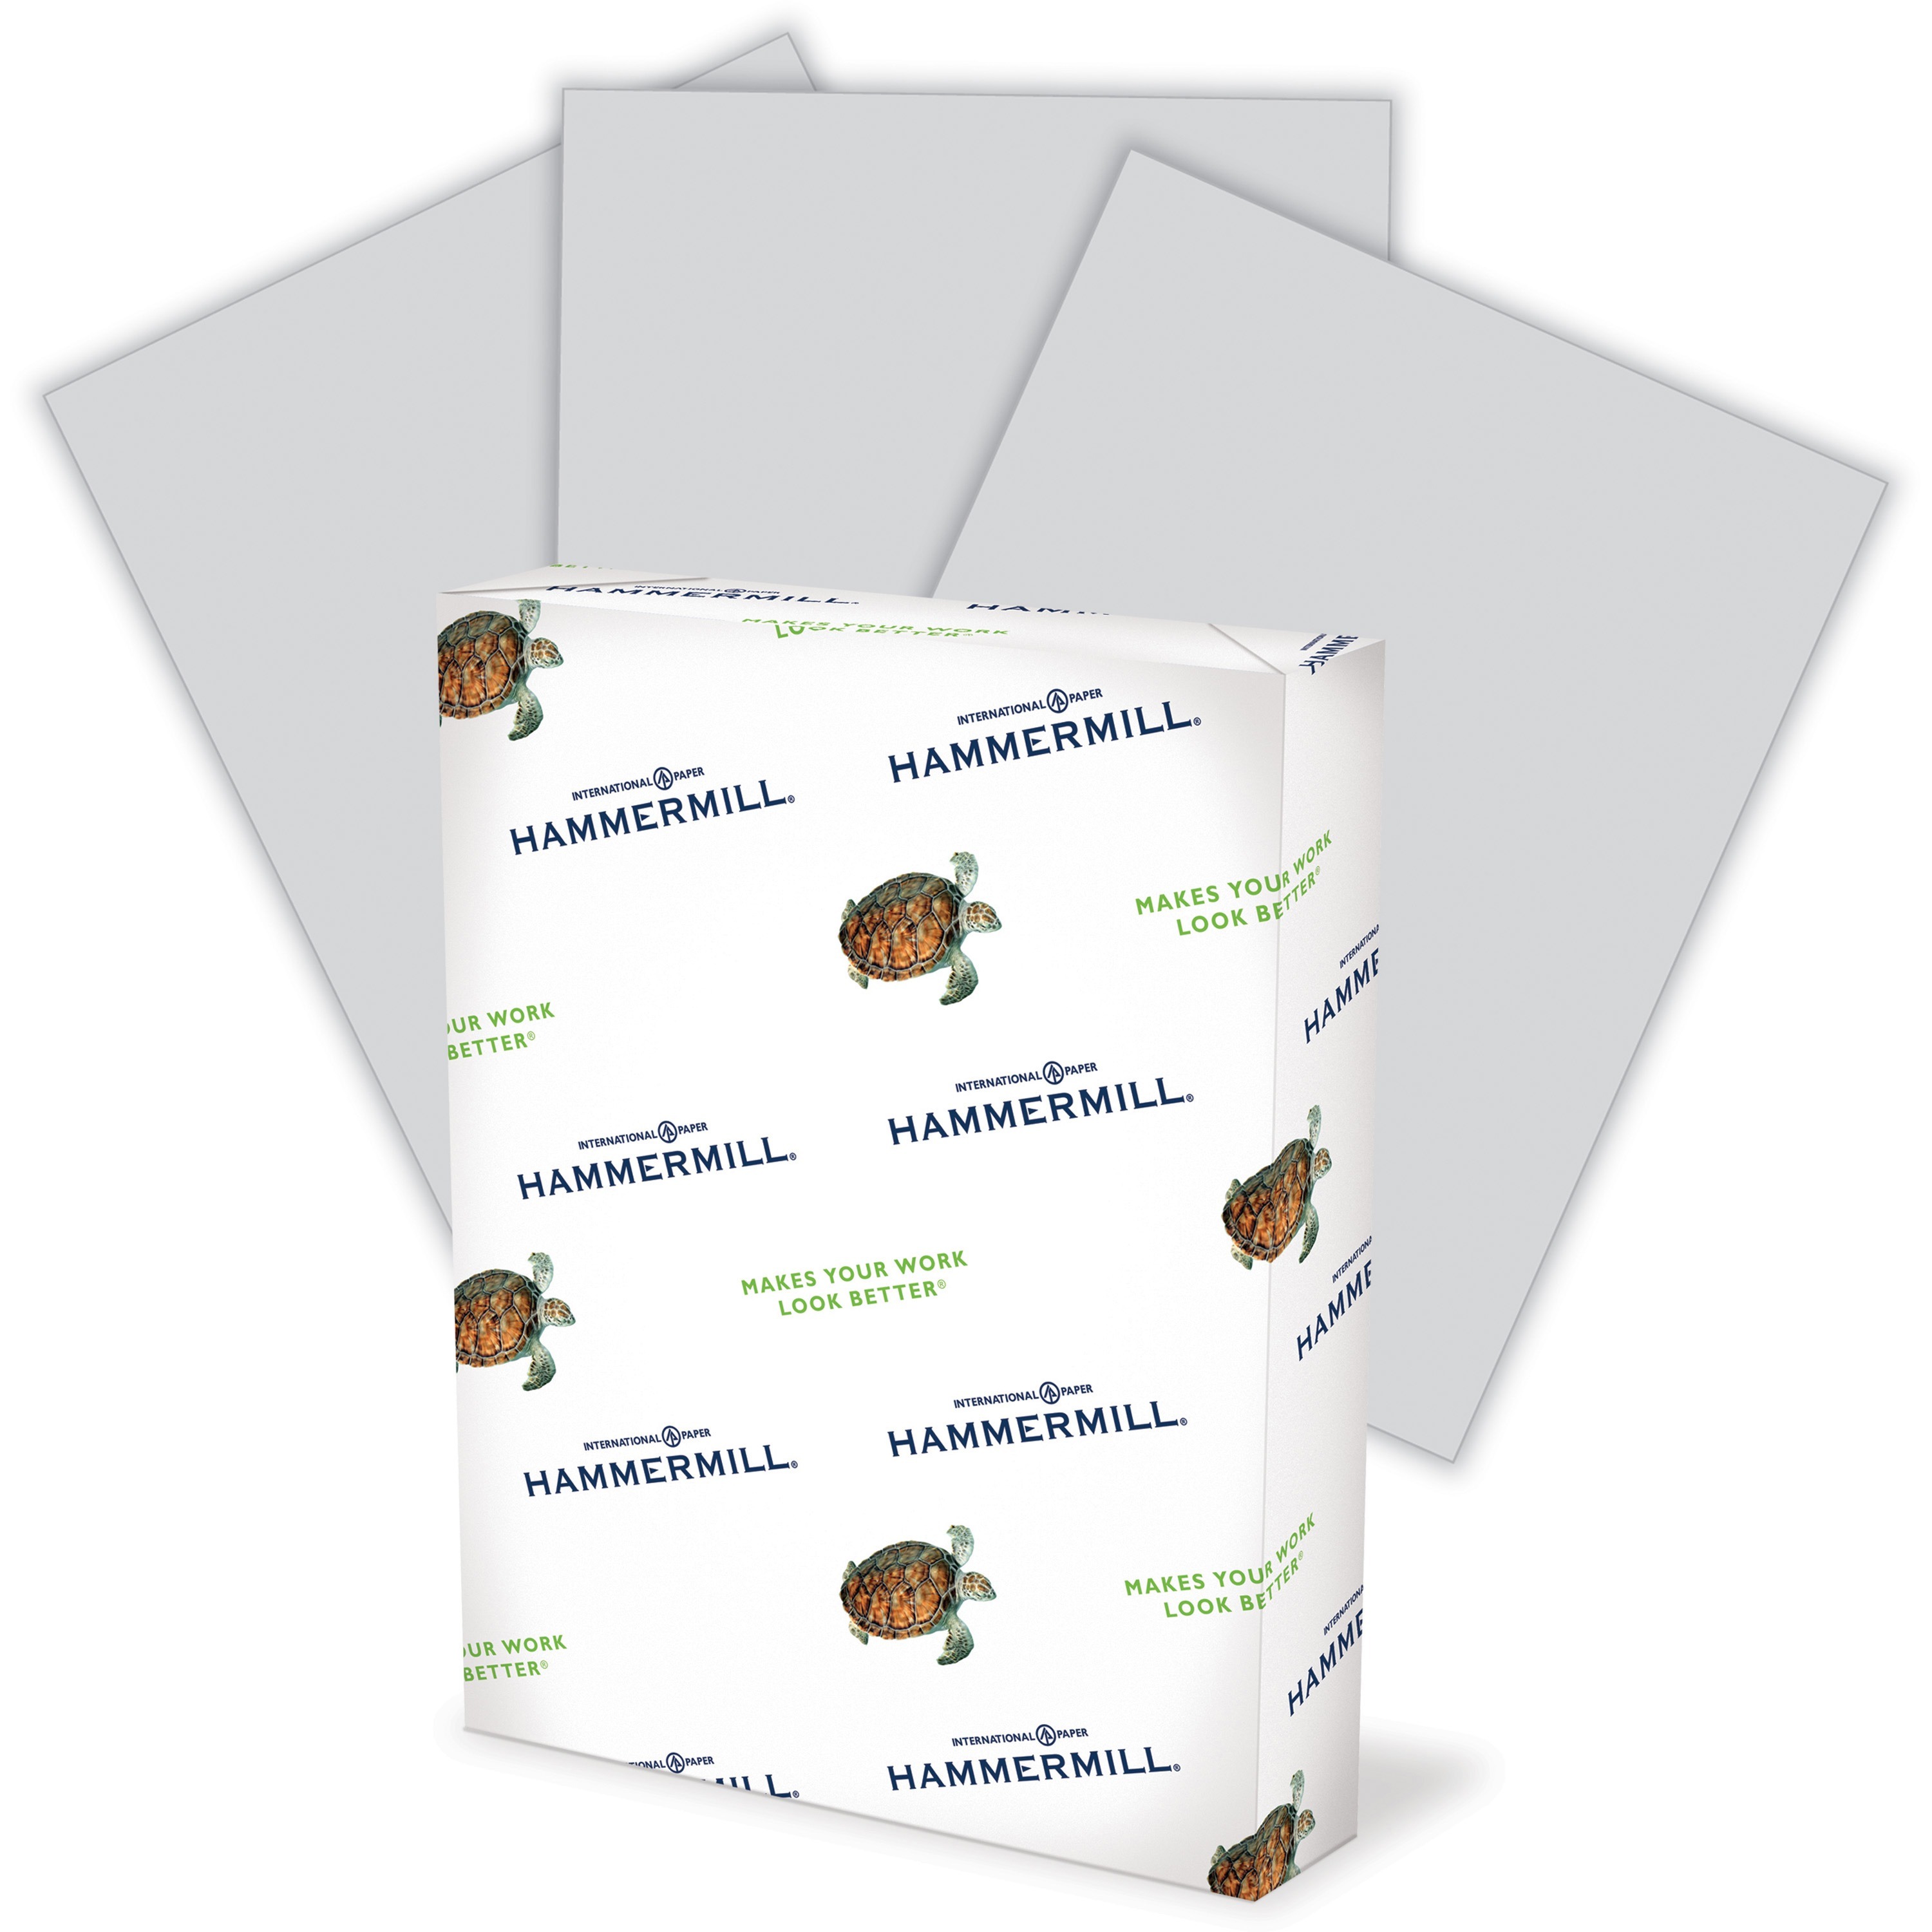  Hammermill Glossy Paper, Laser Gloss Copy Paper, 8.5